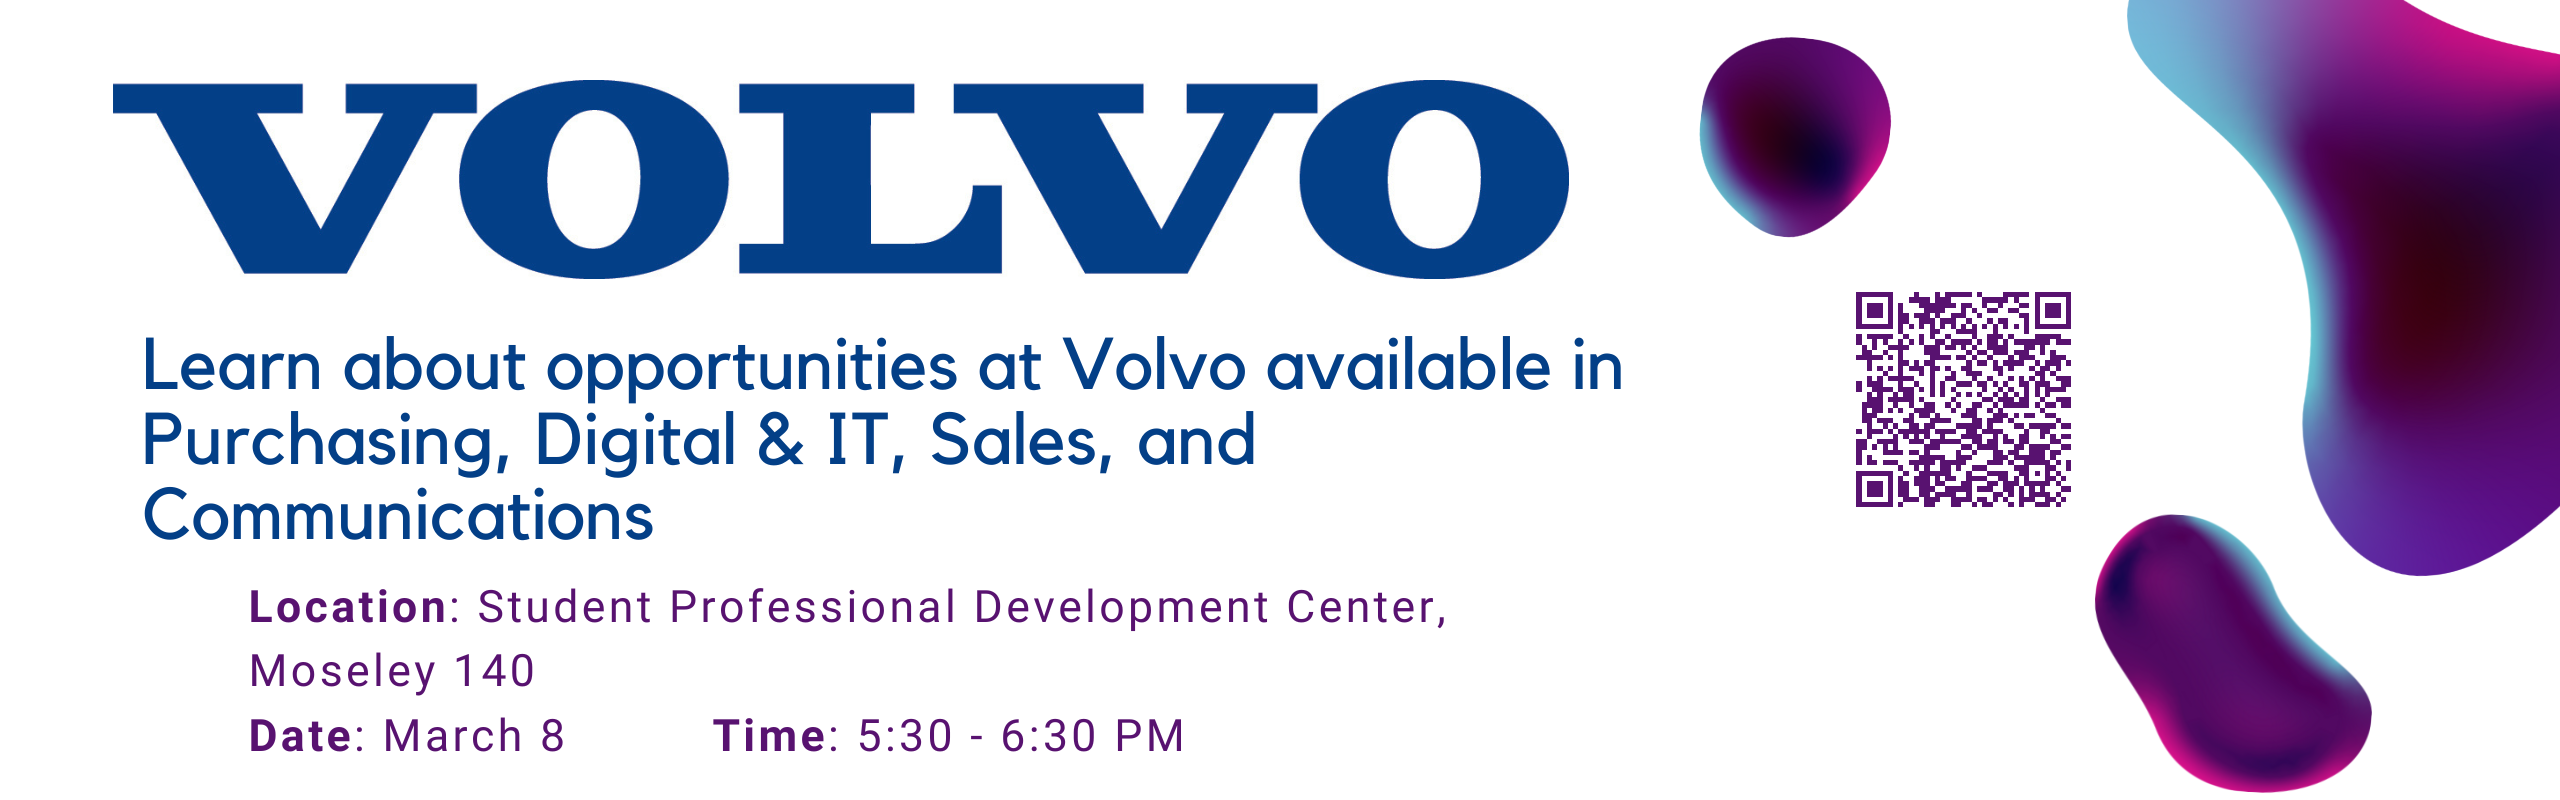 Volvo Group Info Session March 8th 5:30PM review EJN for more details